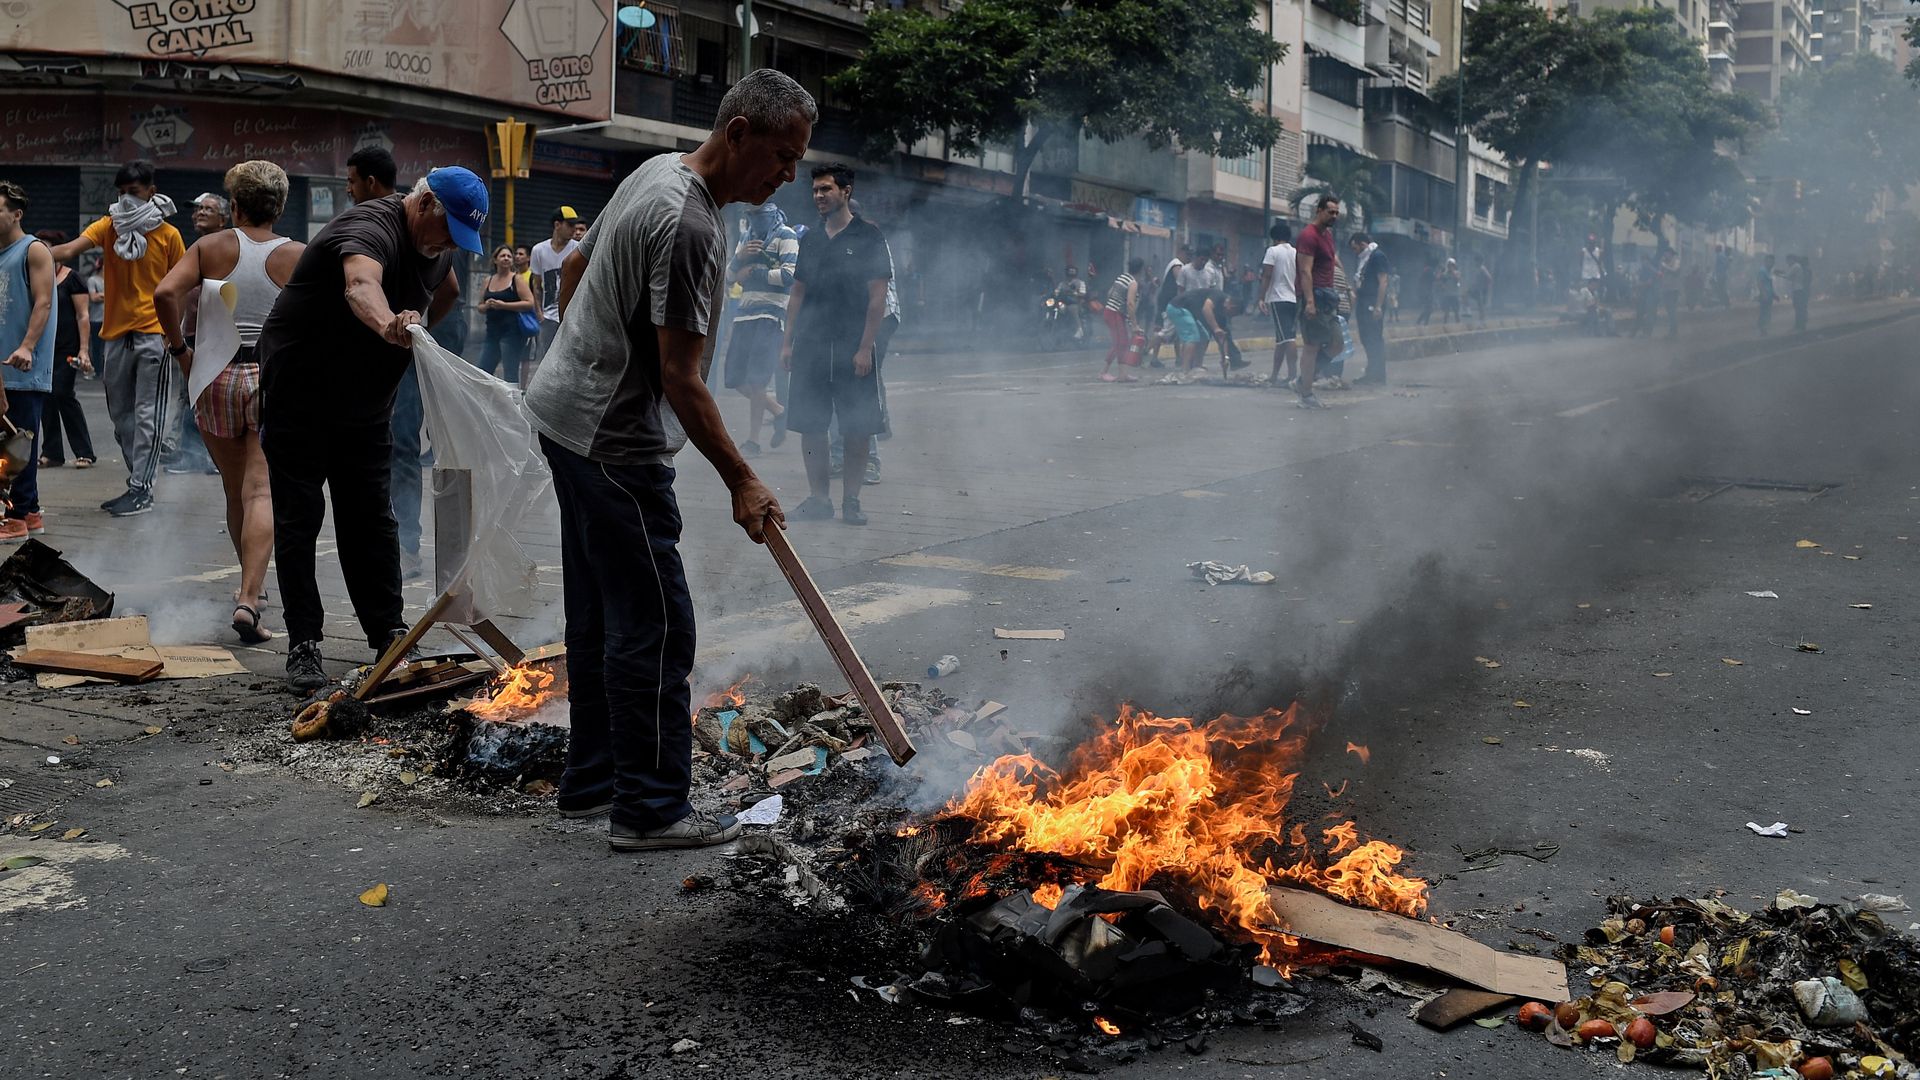 People protest for the lack of water and electric service during a new power outage in Venezuela.